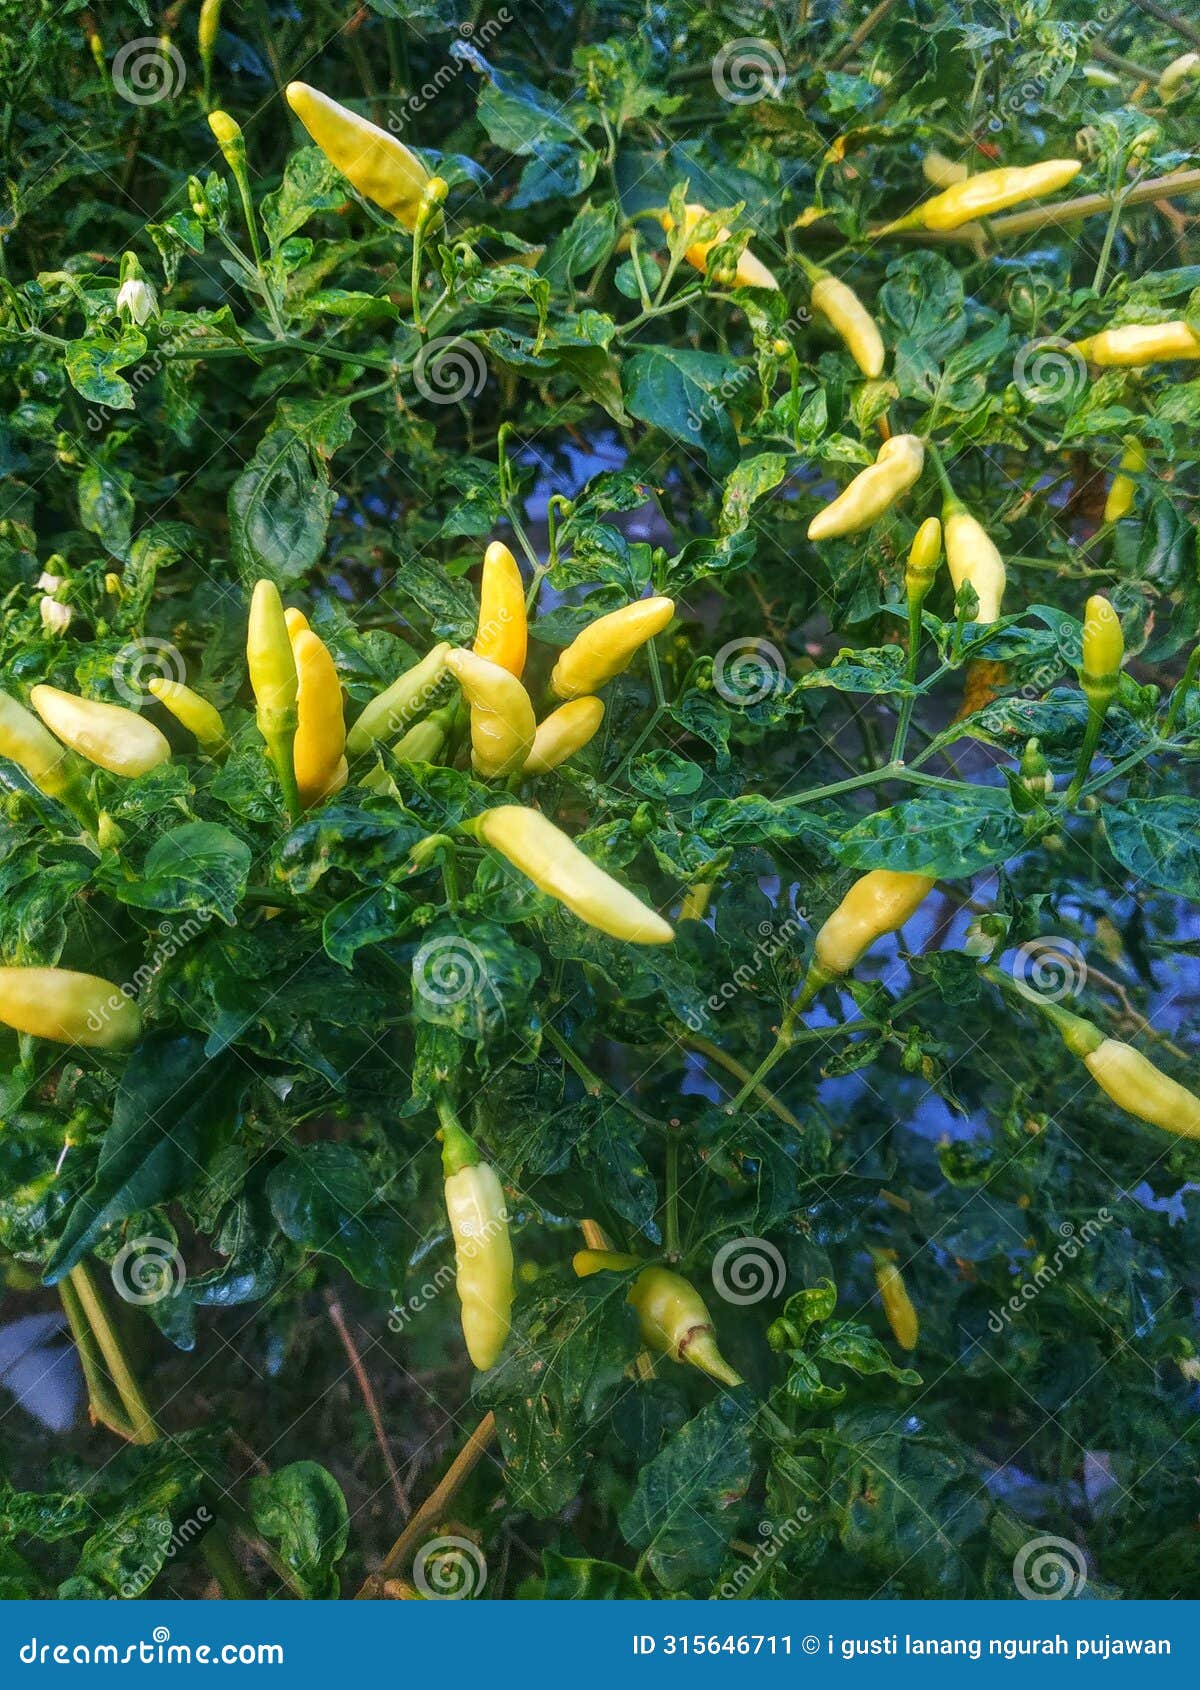 chili trees that have produced fruit and are ready to be harvested